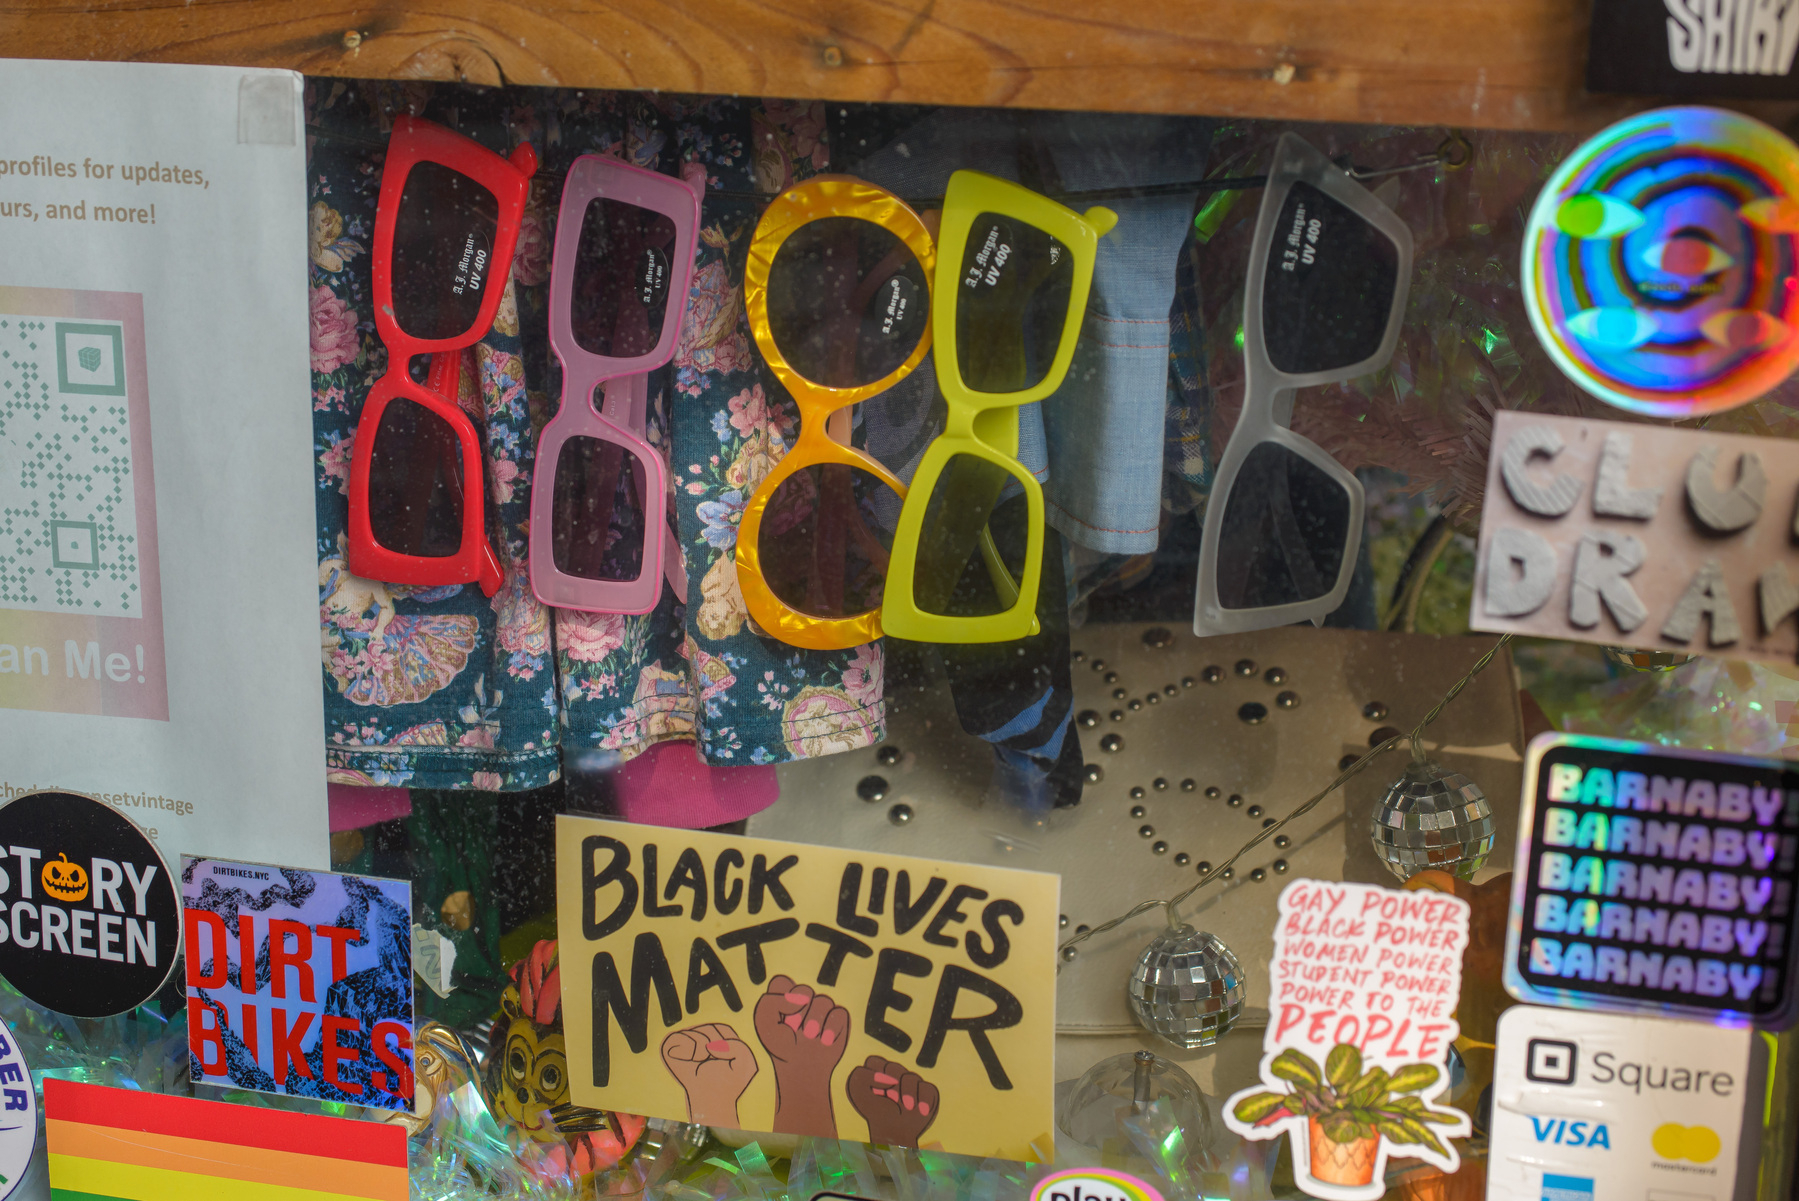 row of colorful bold sunglasses, in a shop window, stickers on the window running around the lower and right edge of the frame, black lives matter sticker with three fists in the middle of the lower edge of the frame